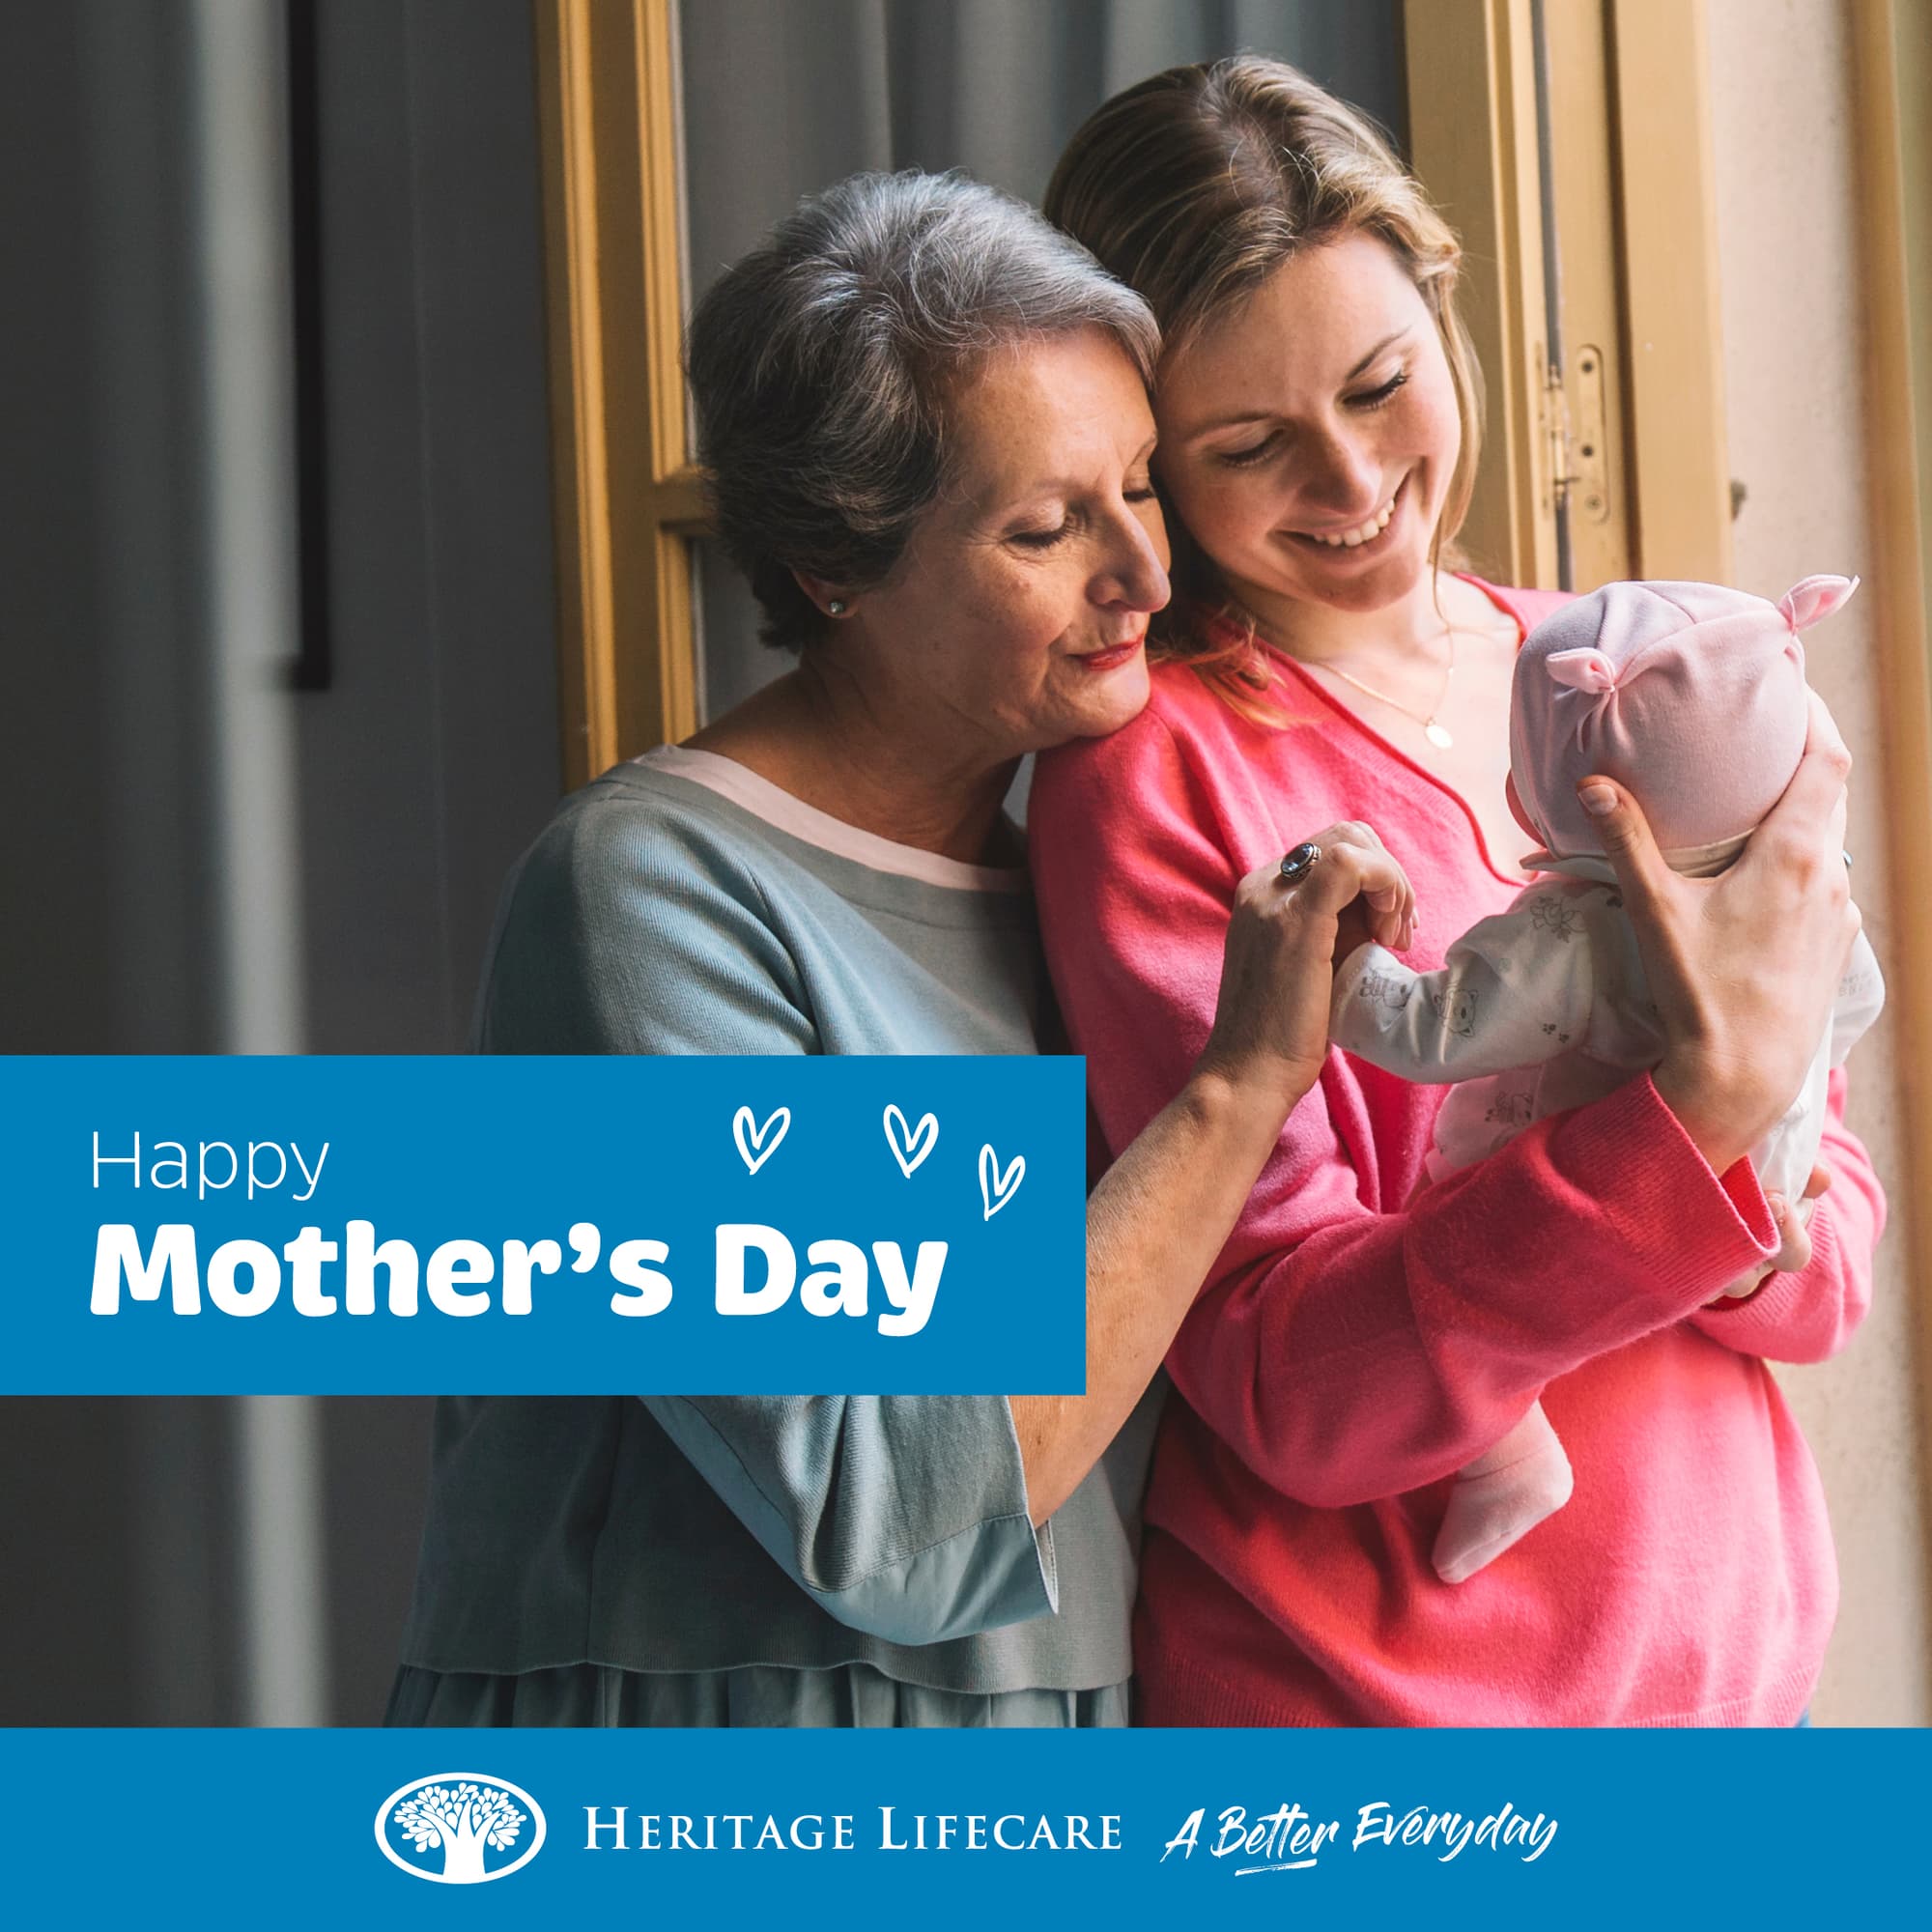 ​Happy Mother's Day to all the amazing mums in New Zealand/Aotearoa!